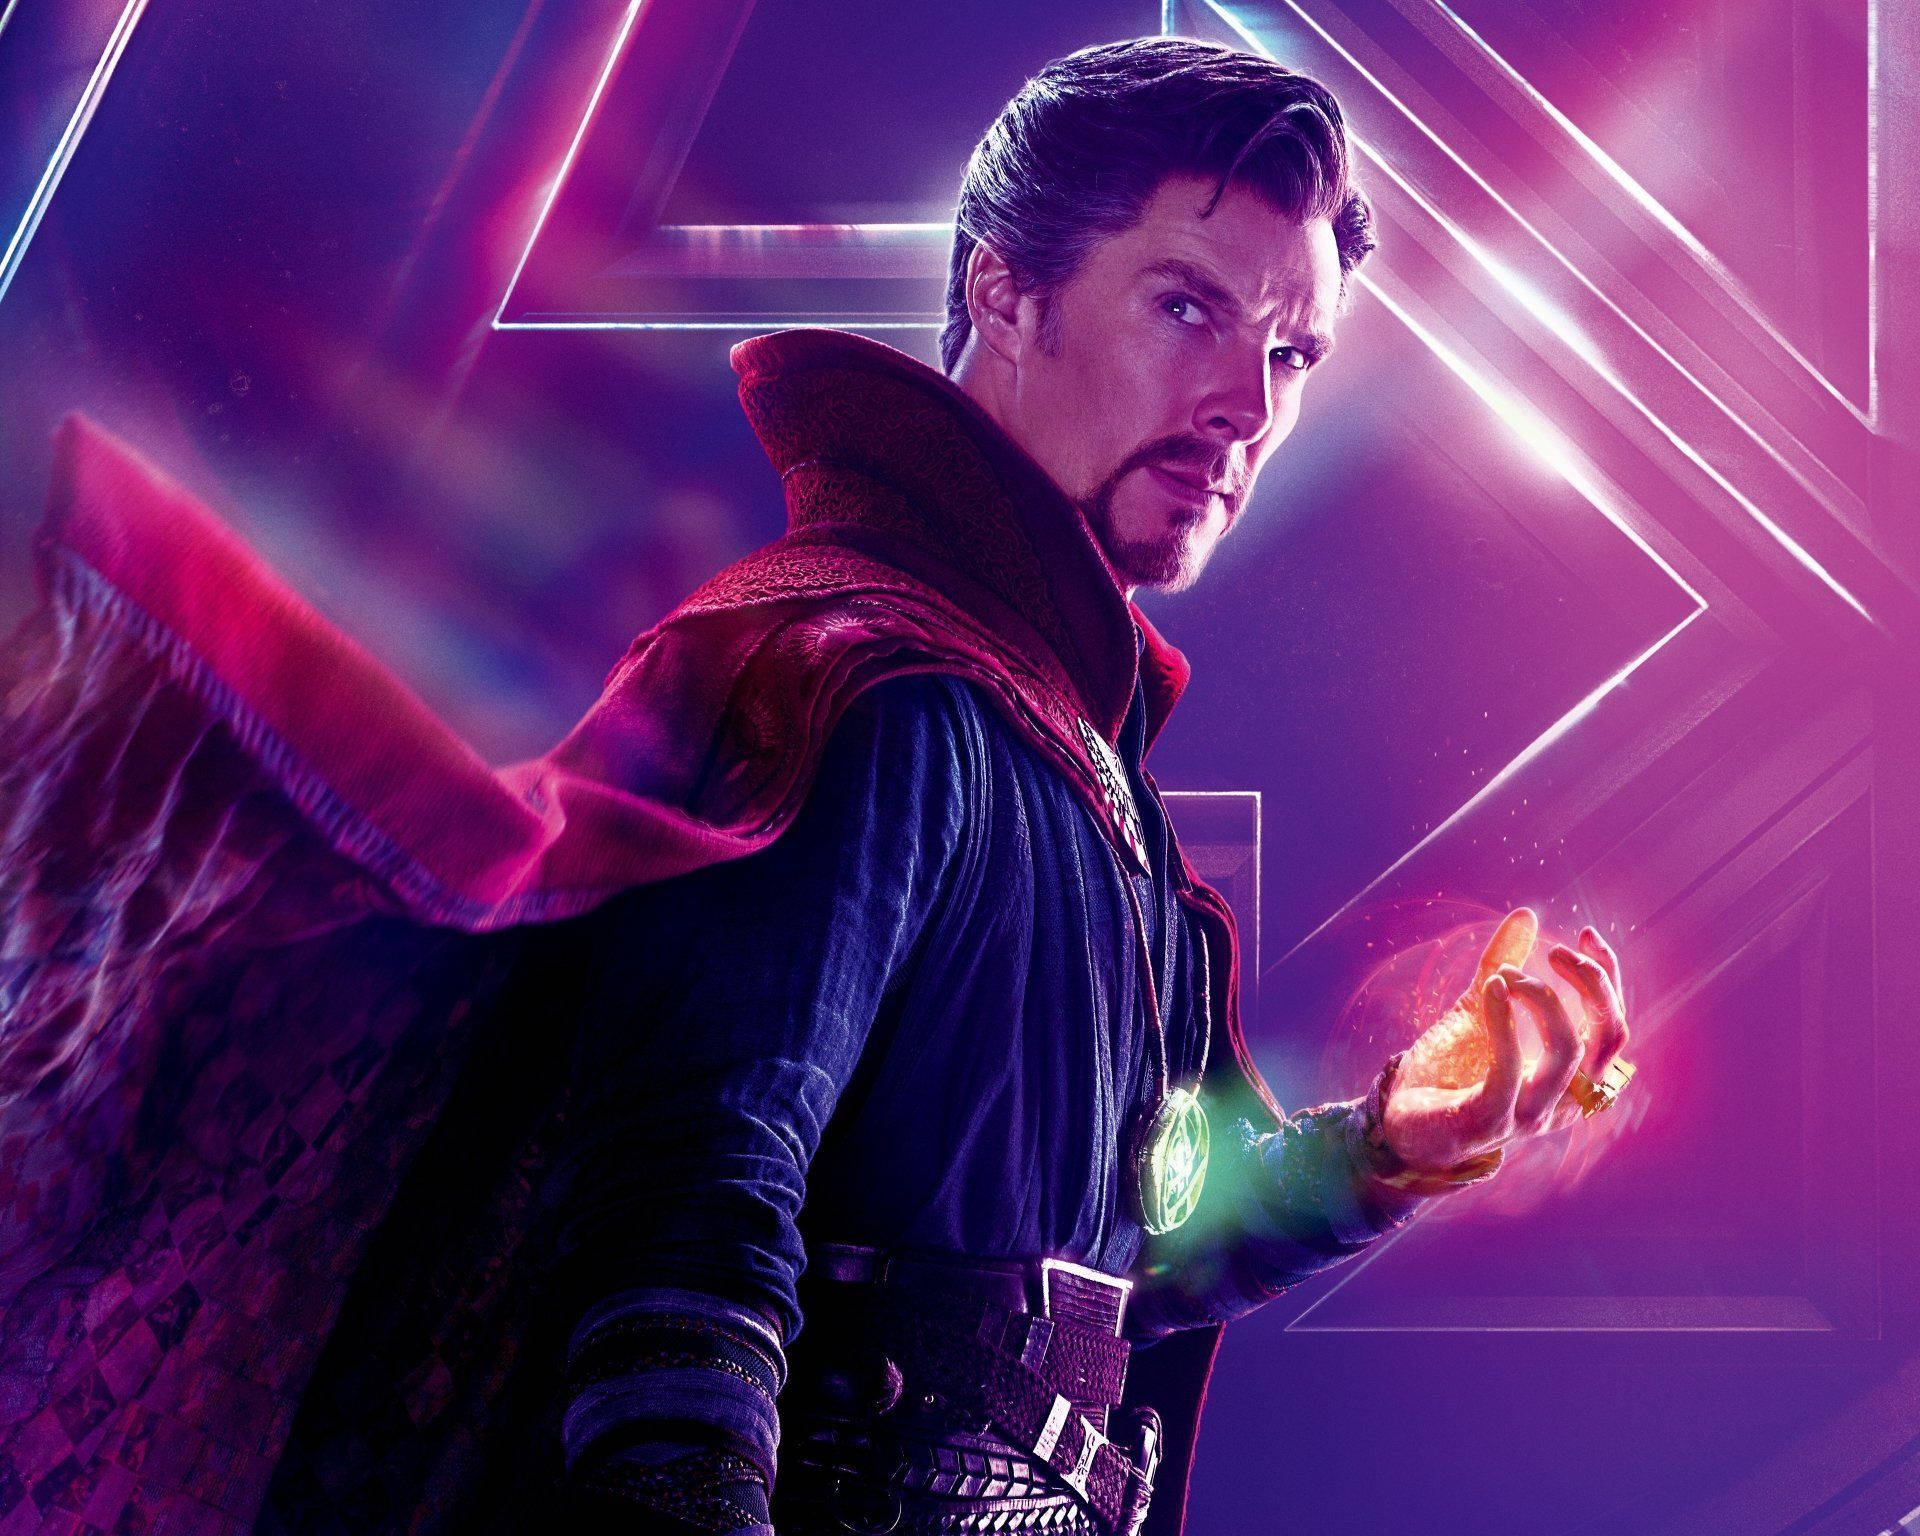 Drstrange Lysande Vänsterhand (for A Suggestion Of A Wallpaper Design Featuring Dr Strange's Glowing Left Hand) Wallpaper